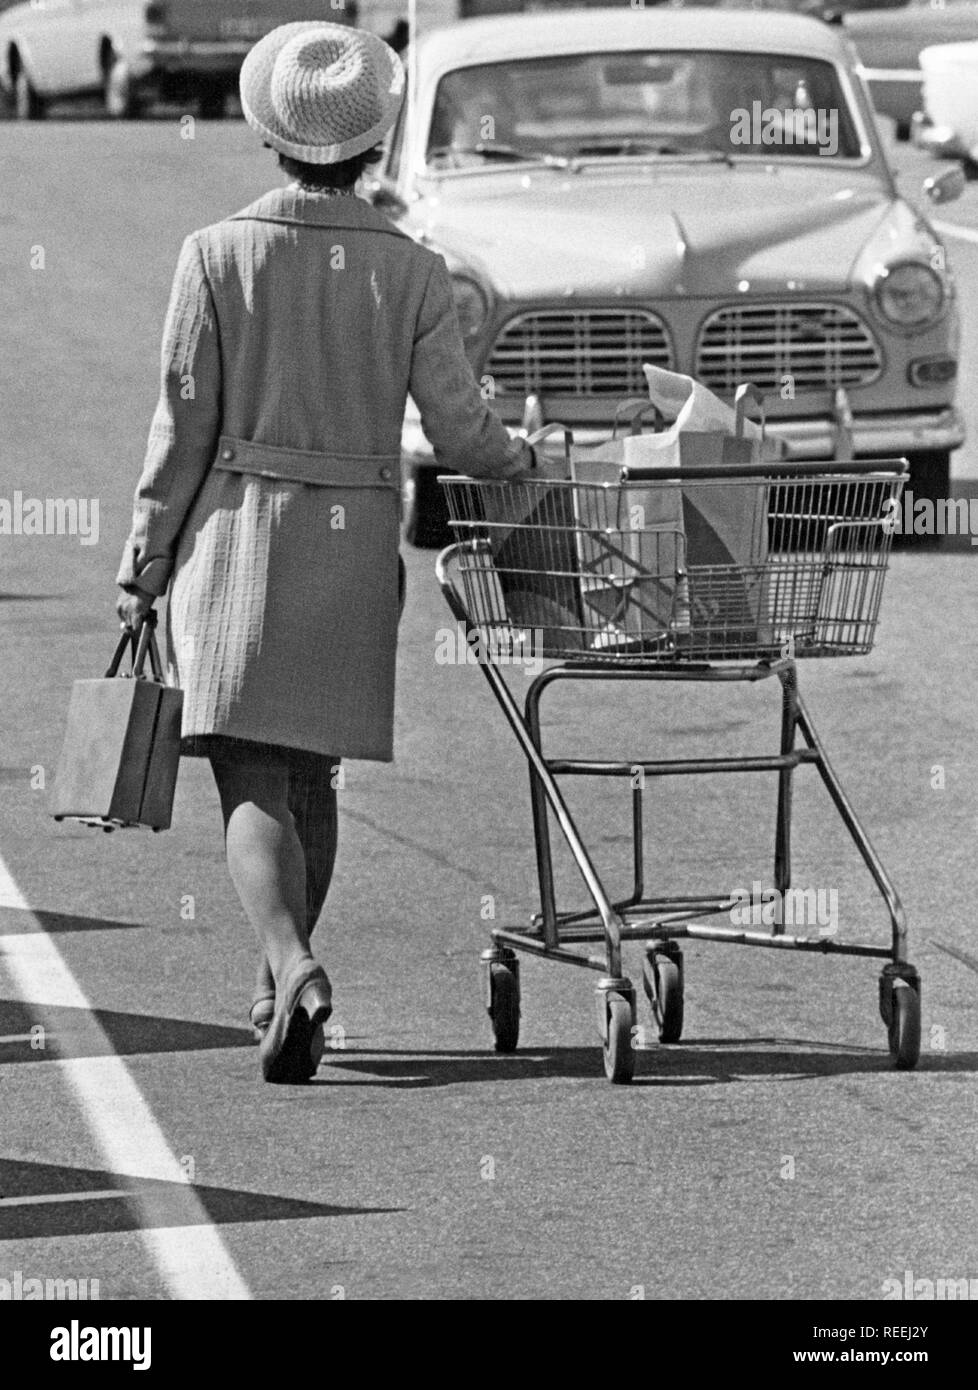 Shopping in the 1970s. A lady is leaving the supermarket and heading for her car pushing the shopping cart on the parking lot. Sweden 1970 Stock Photo